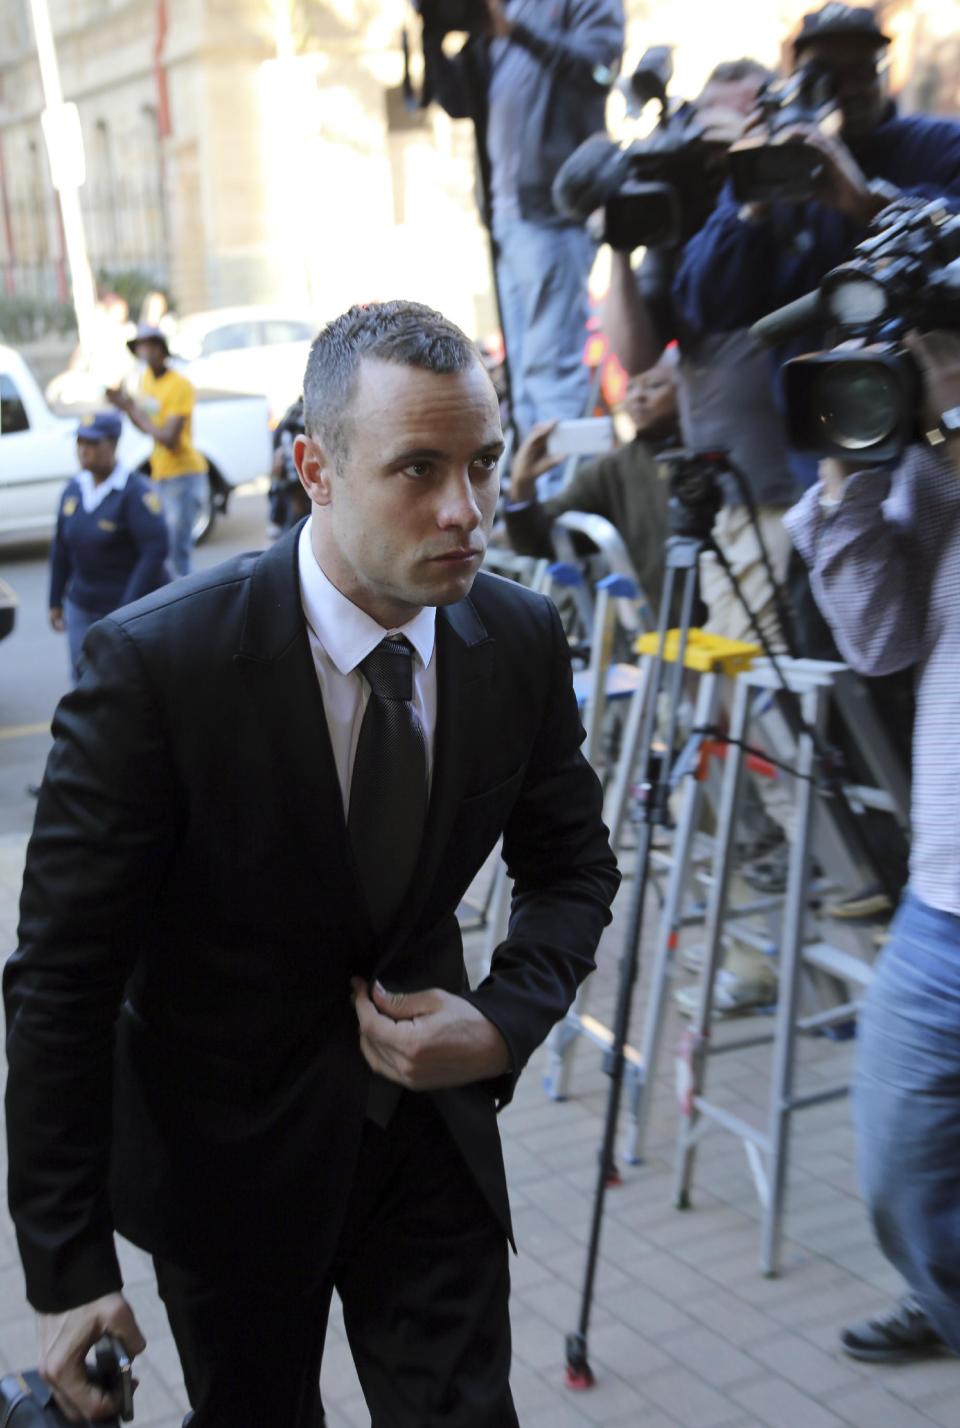 Oscar Pistorius arrives at the high court in Pretoria, South Africa, Monday, March 12, 2014. Pistorius is charged with murder for the shooting death of his girlfriend, Reeva Steenkamp, on Valentines Day in 2013. (AP Photo/Themba Hadebe)